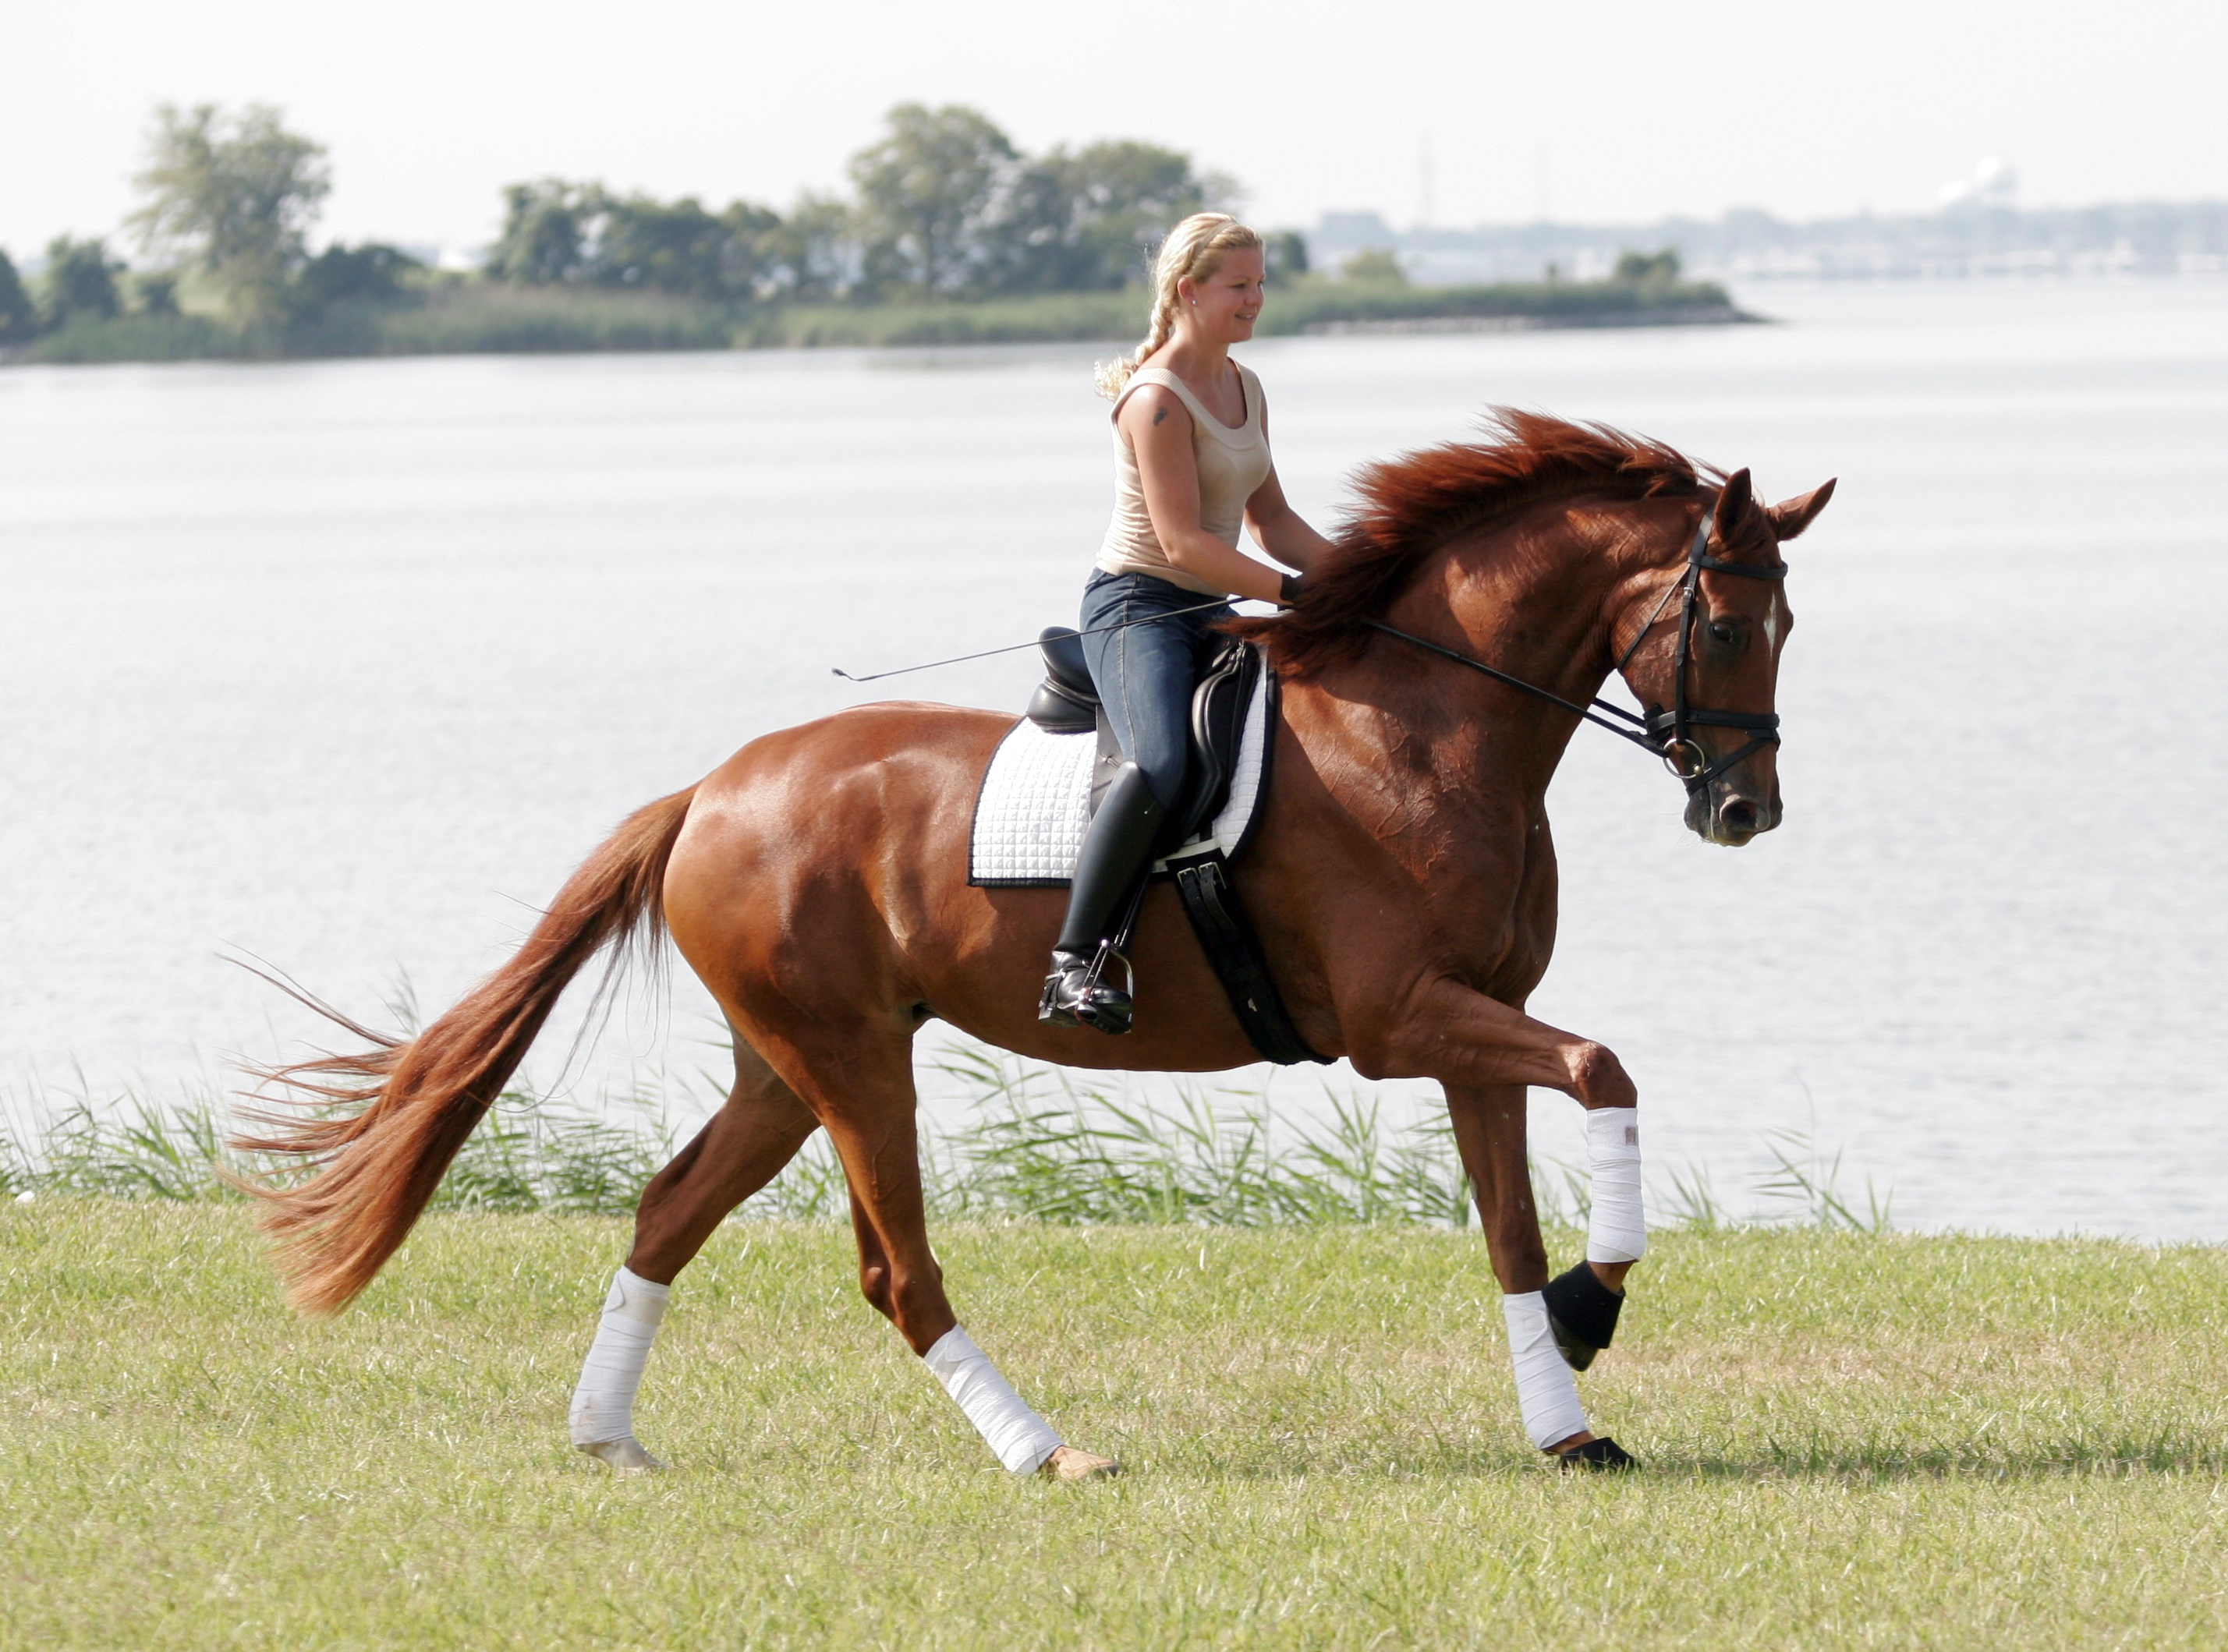 Equitation: Pleasure riding, Trail riding, Hacking, Recreational outdoor activity. 2860x2120 HD Background.